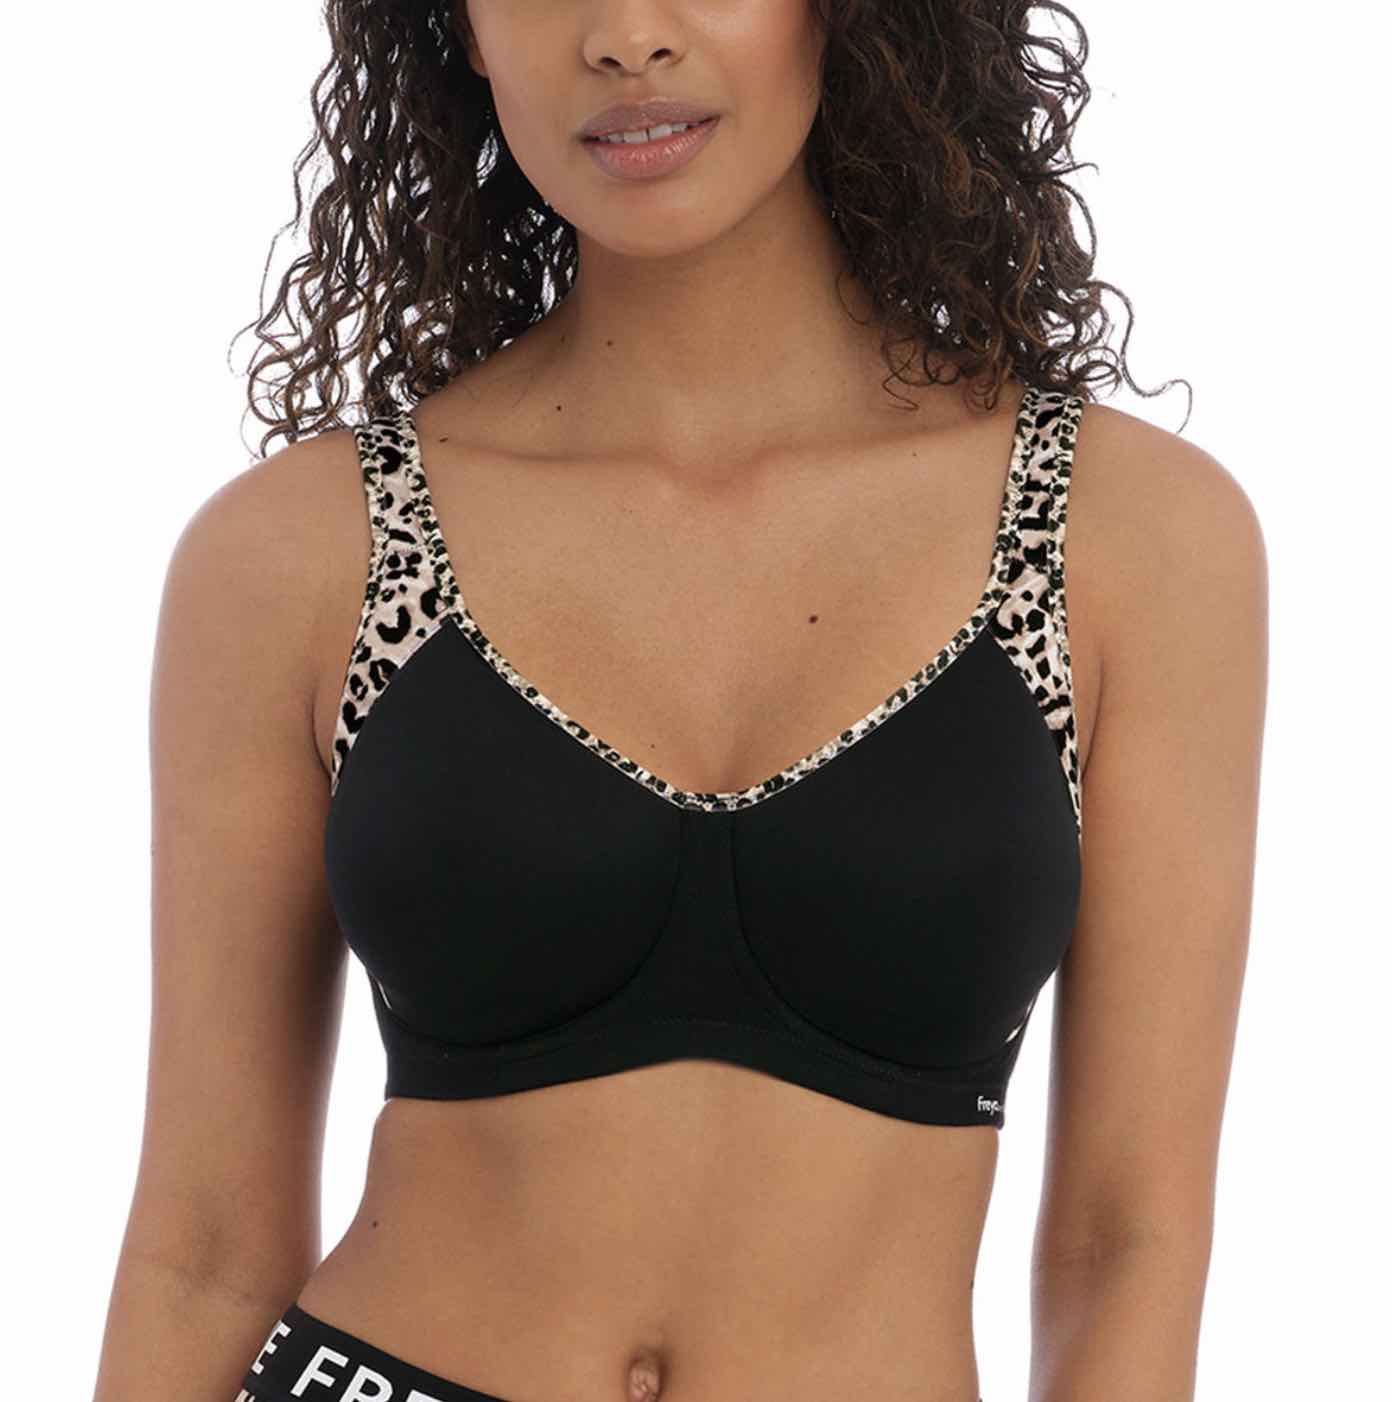 FREYA SONIC STORM MOULDED SPACER SPORTS BRA